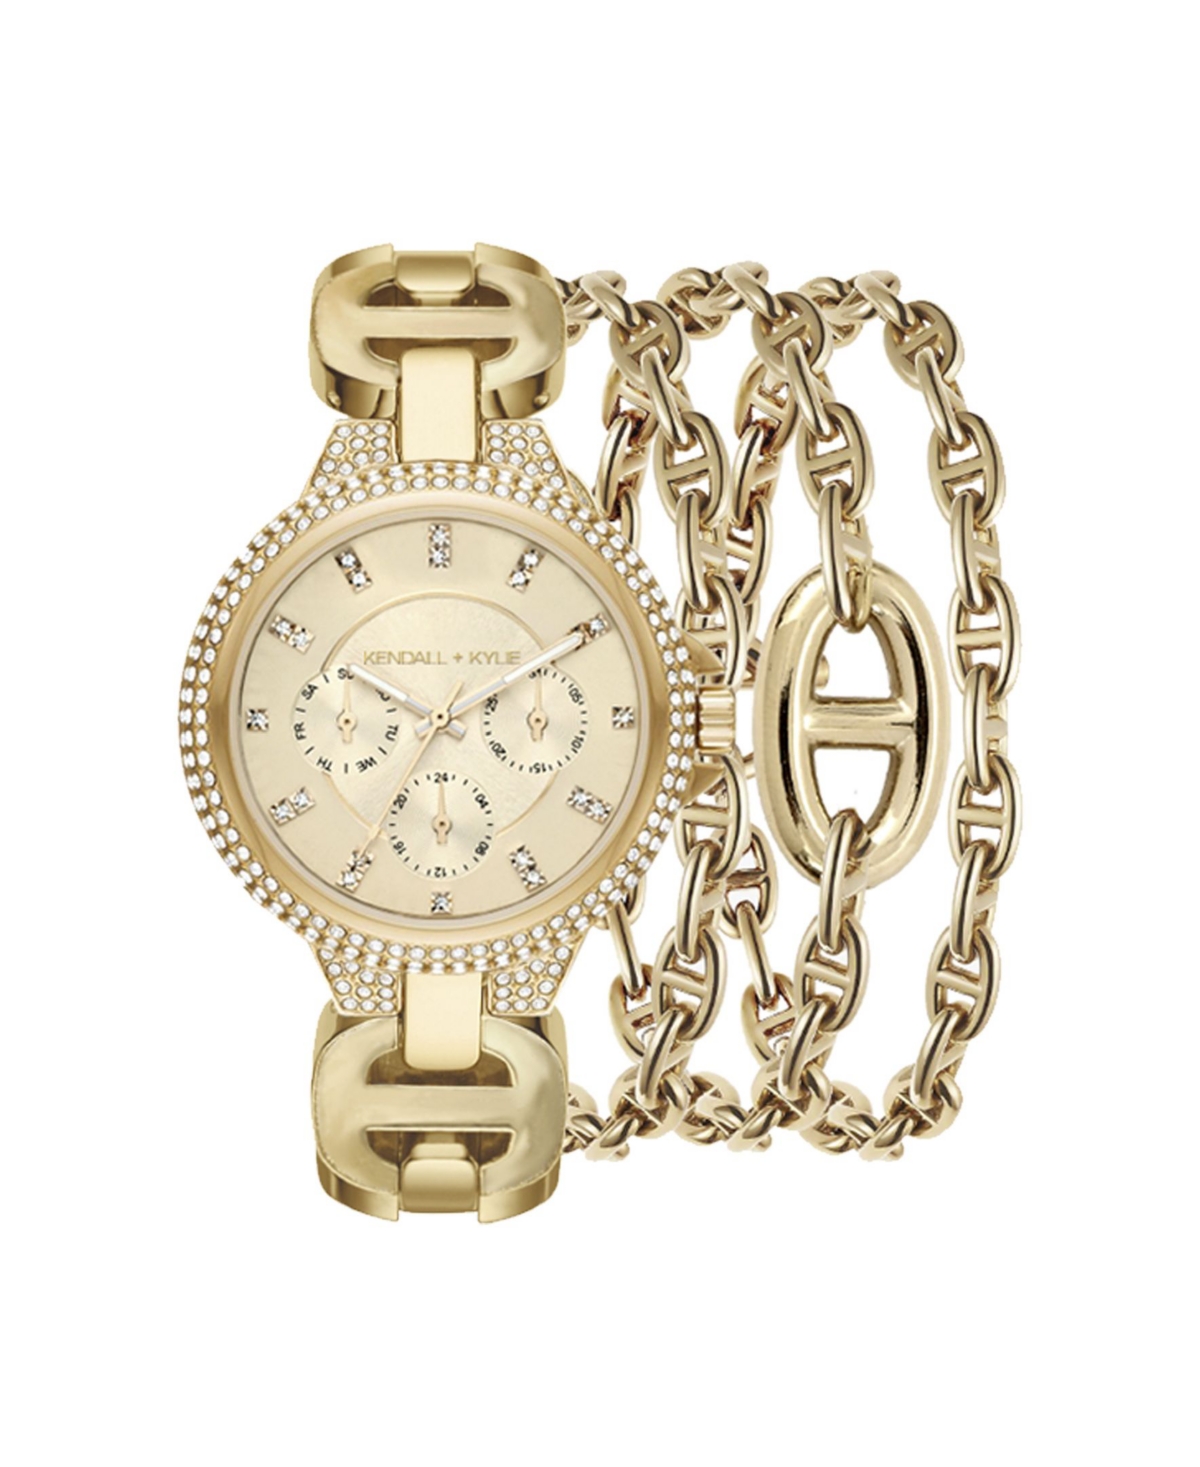 iTouch Women's Kendall + Kylie Gold -Tone Metal Bracelet Watch - Gold